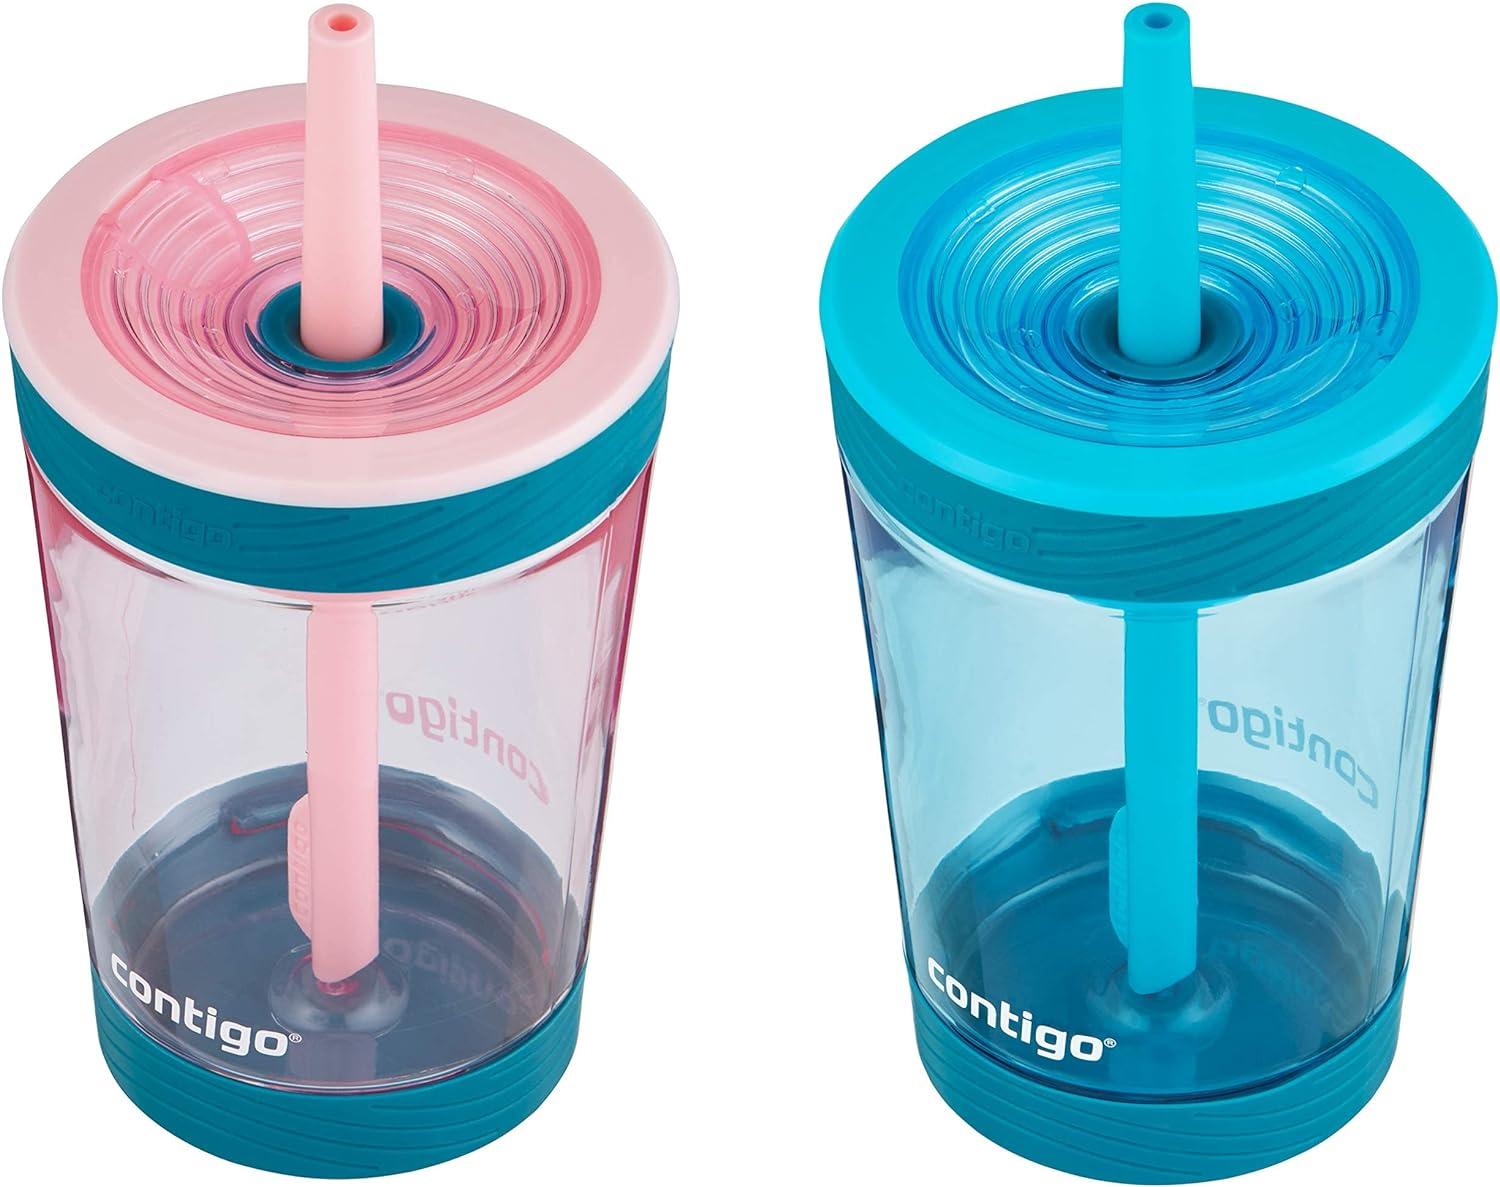 Contigo Kids Spill-Proof 14oz Tumbler with Straw and BPA-Free Plastic, Fits  Most Cup Holders and Dis…See more Contigo Kids Spill-Proof 14oz Tumbler